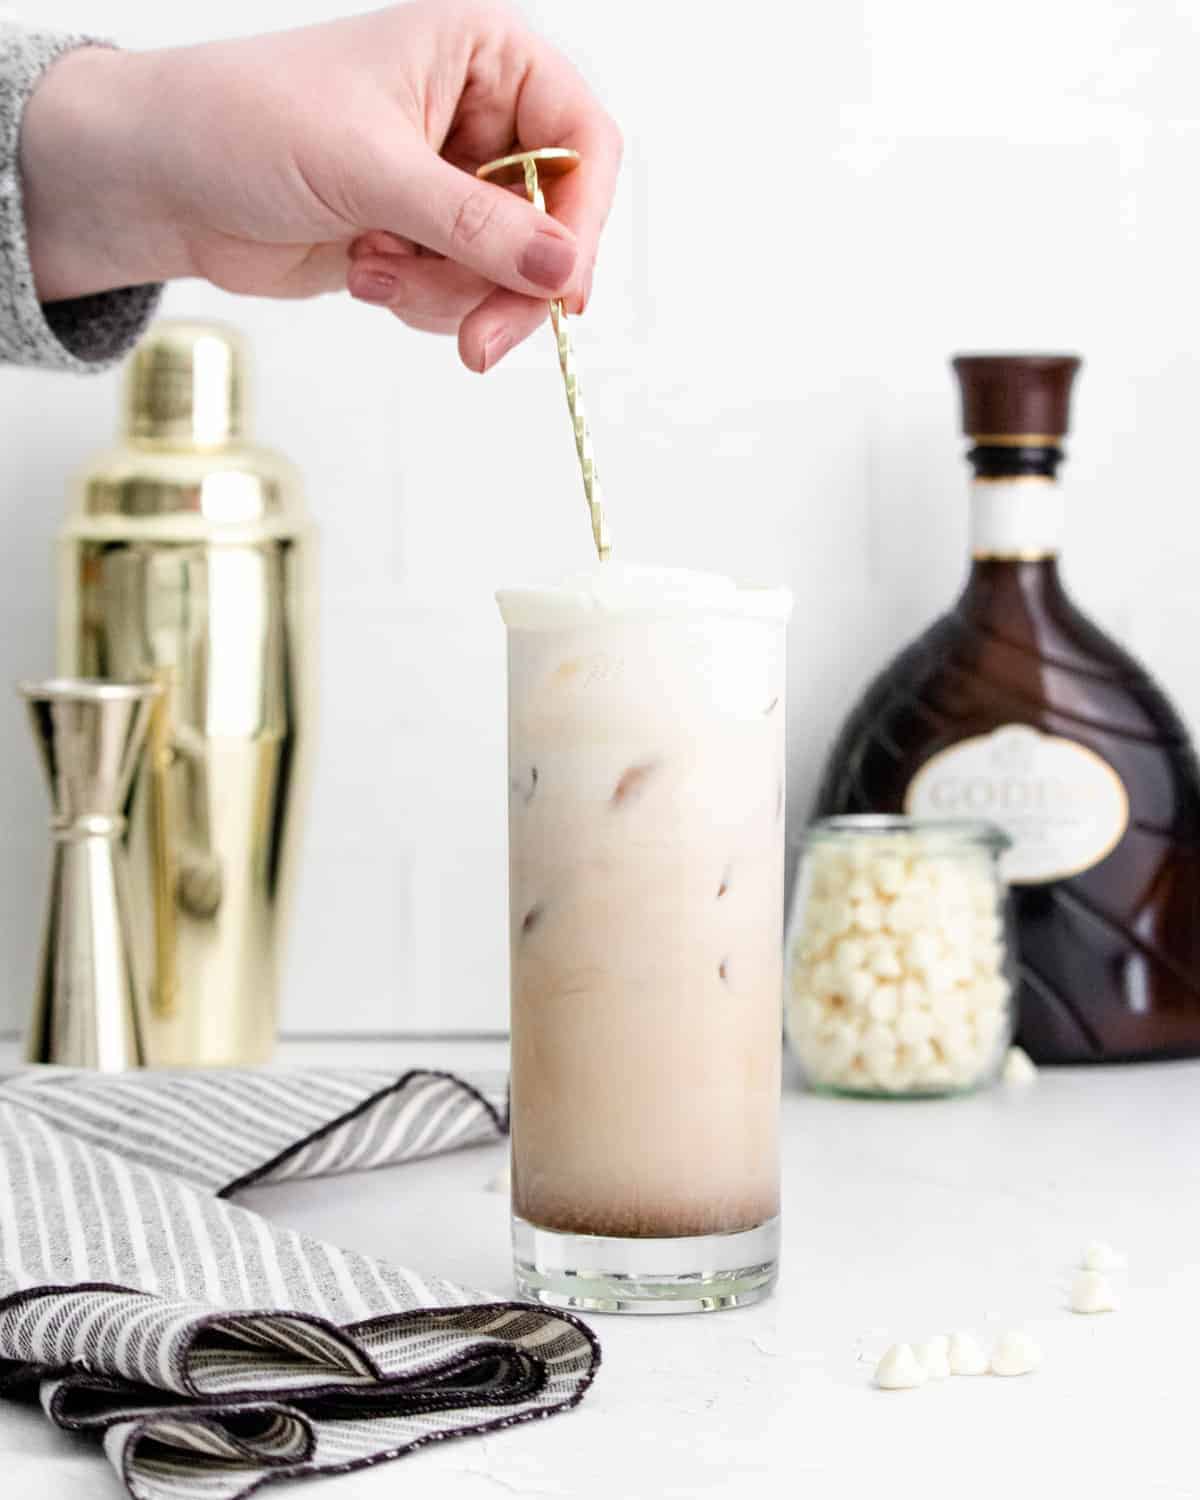 Tall iced white russian in a clear glass, being stirred.